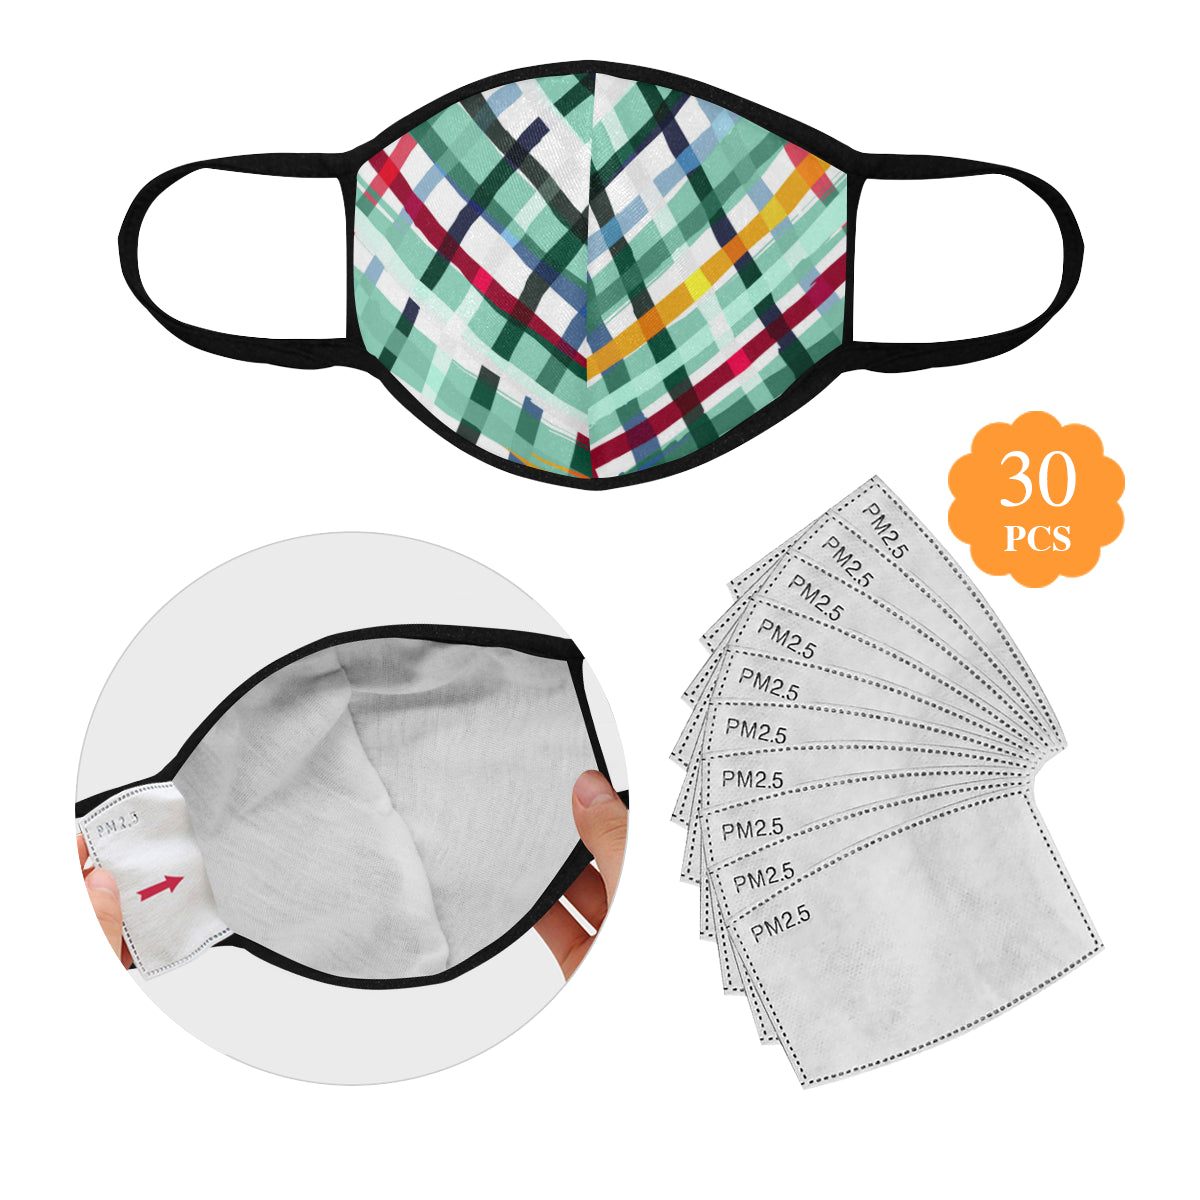 Cross Stitch Shape Cotton Fabric Face Mask with filter slot (30 Filters Included) - Non-medical use